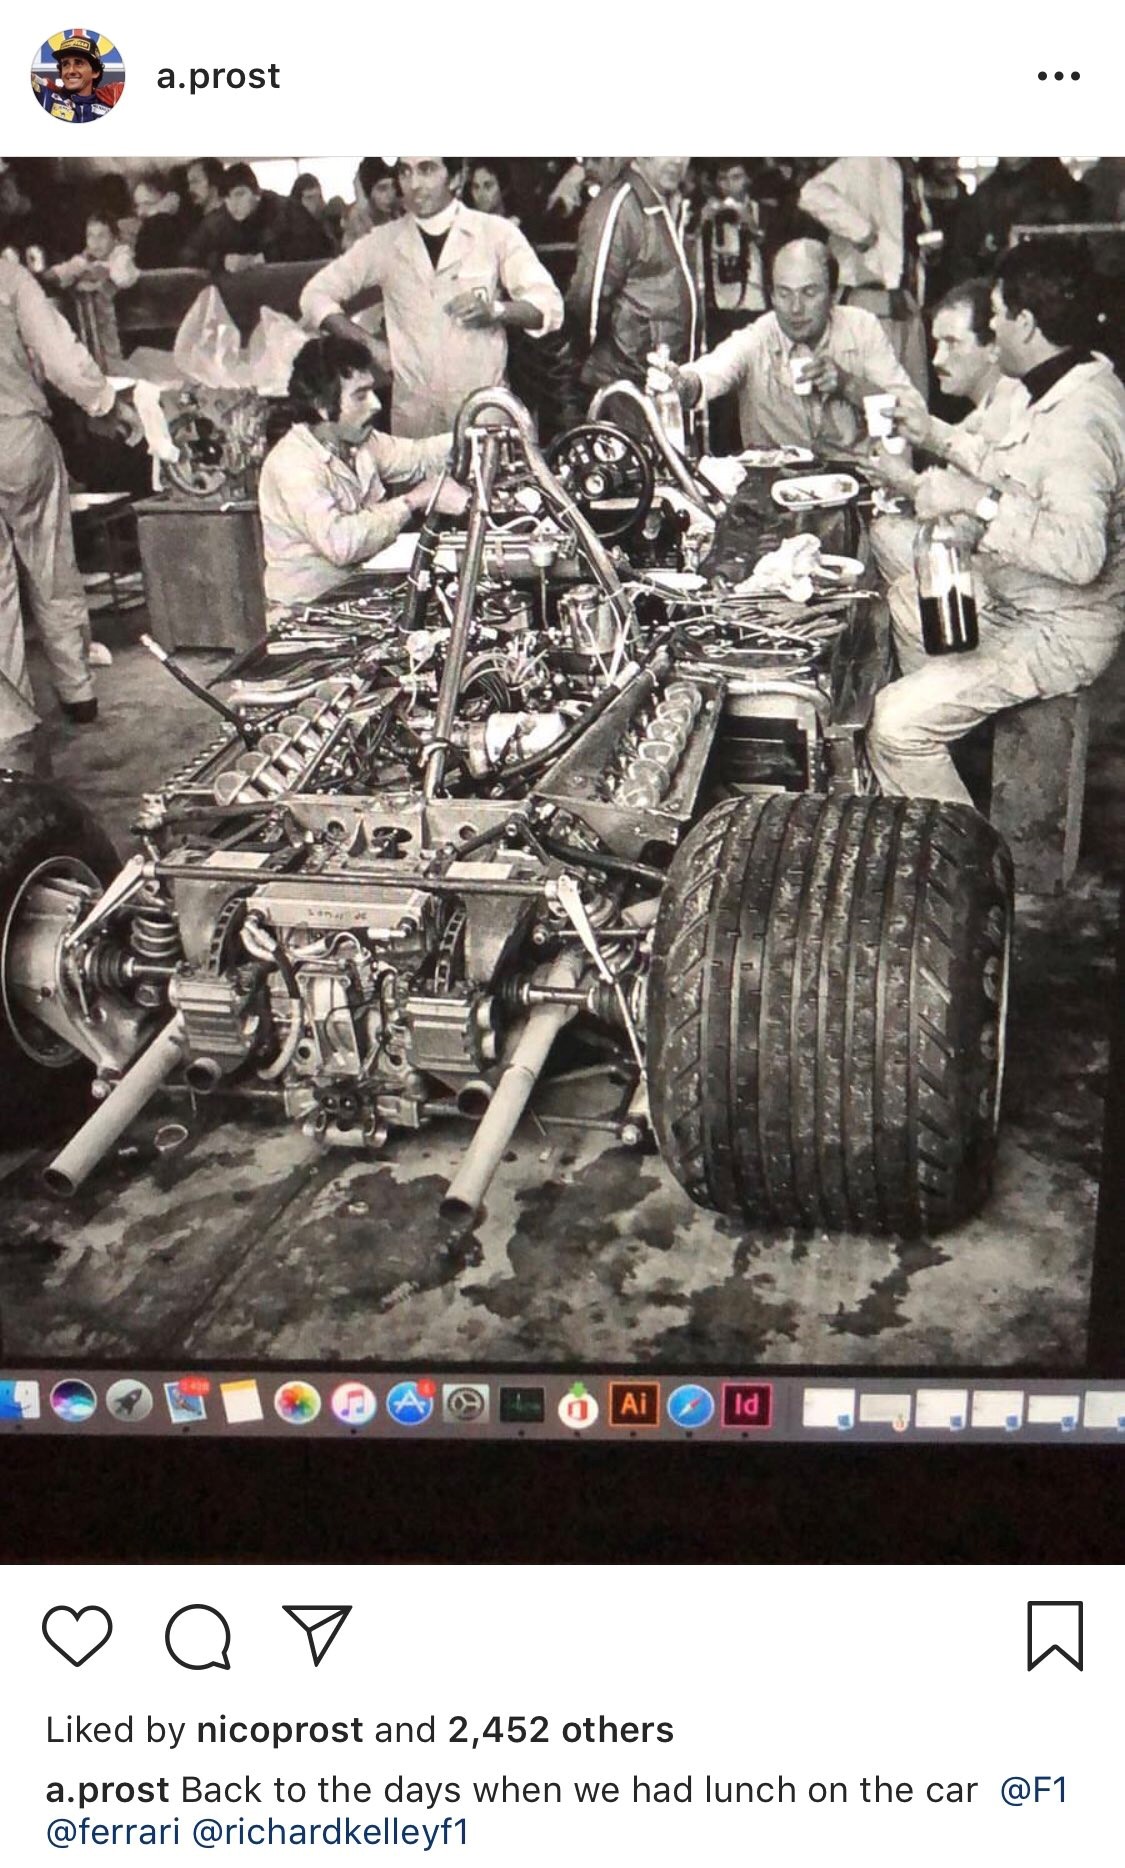 The flanks of the Ferrari 312 T2 serve as a table for the Scuderia Ferrari mechanics’ traditional pasta and Lambrusco dinner as they pause to eat during a long-night’s preparation of the car for the 1977 United States Grand Prix. 